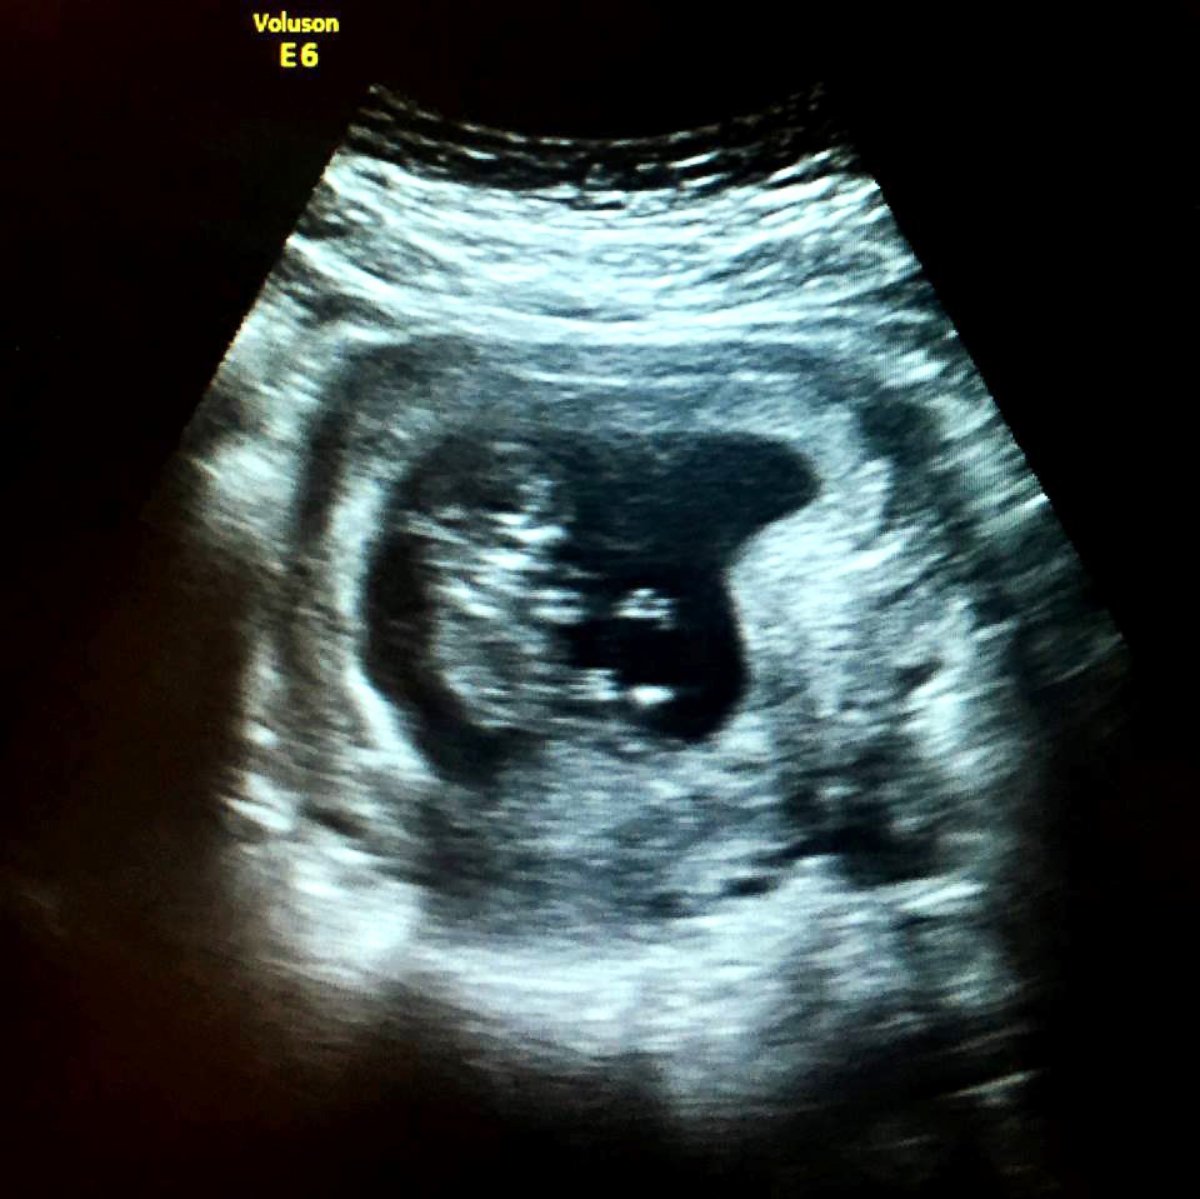 PHOTO: Dan Majesky shared an ultrasound of his first child with wife, Leah, on Facebook in a now viral post.